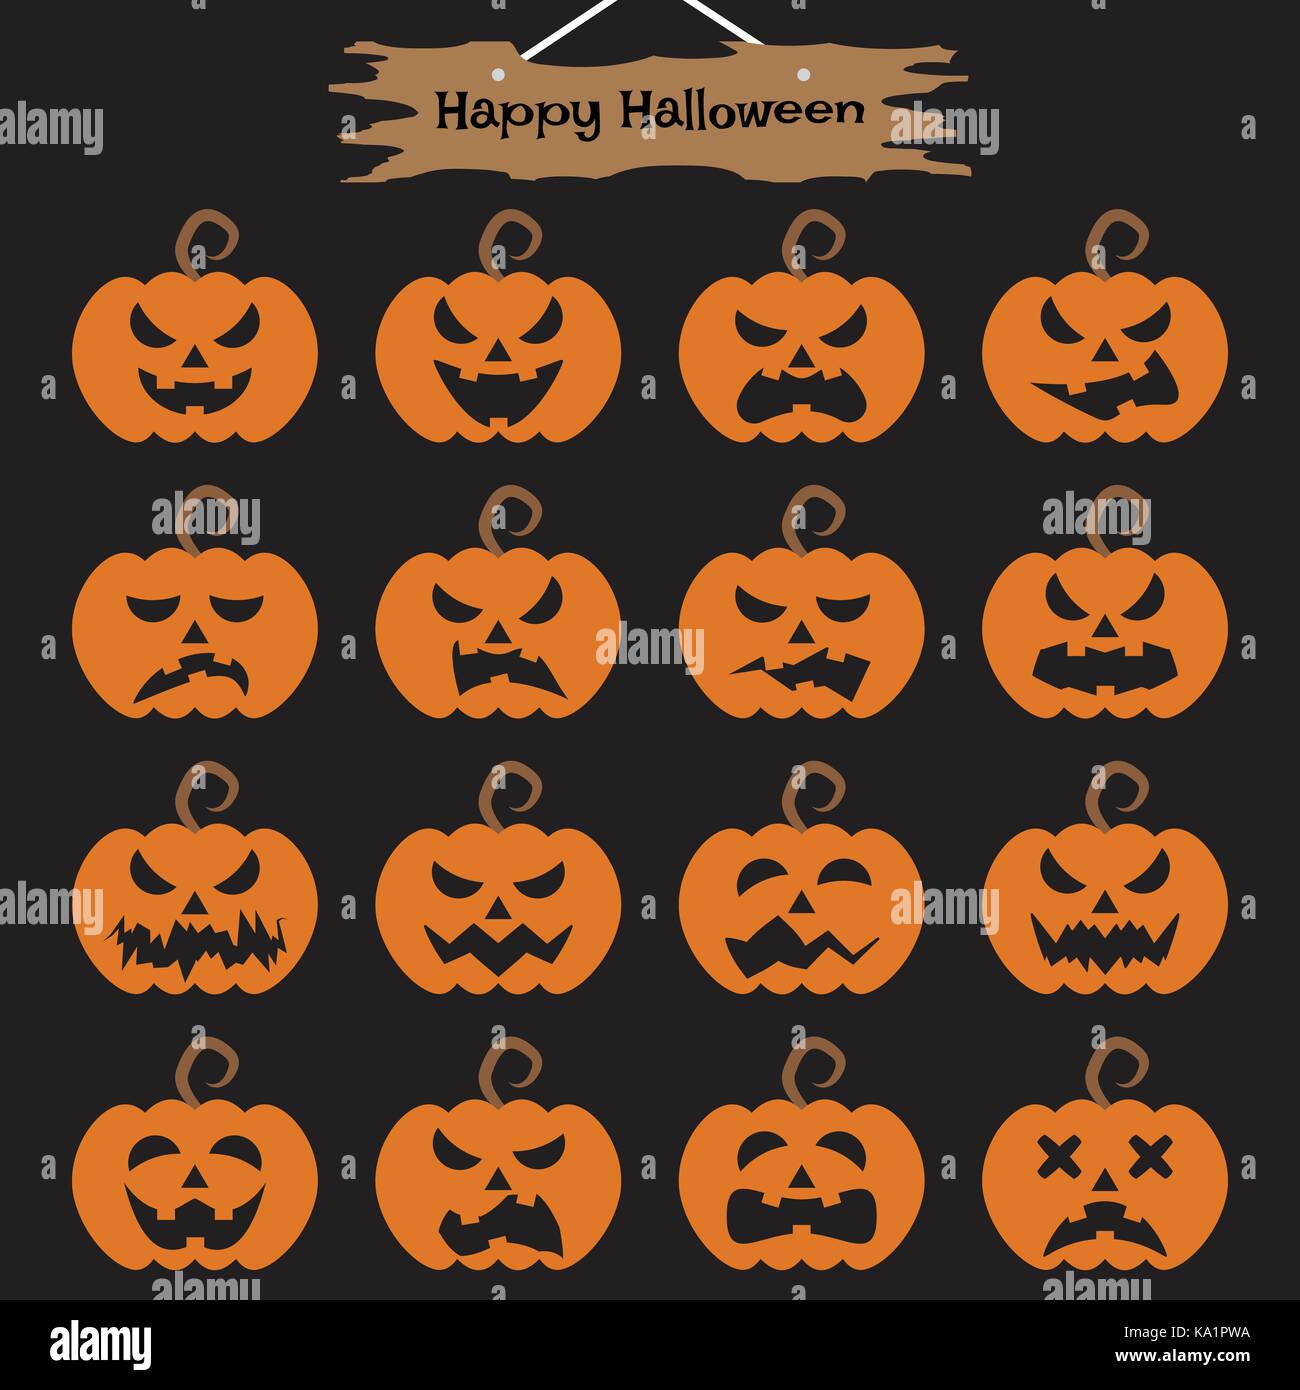 Vector Easy-To-Use 16 Flat Emoticons Of Pumpkin As Different Facial Expressions On Black Background With  Happy Halloween Plank Hung Above Stock Vector